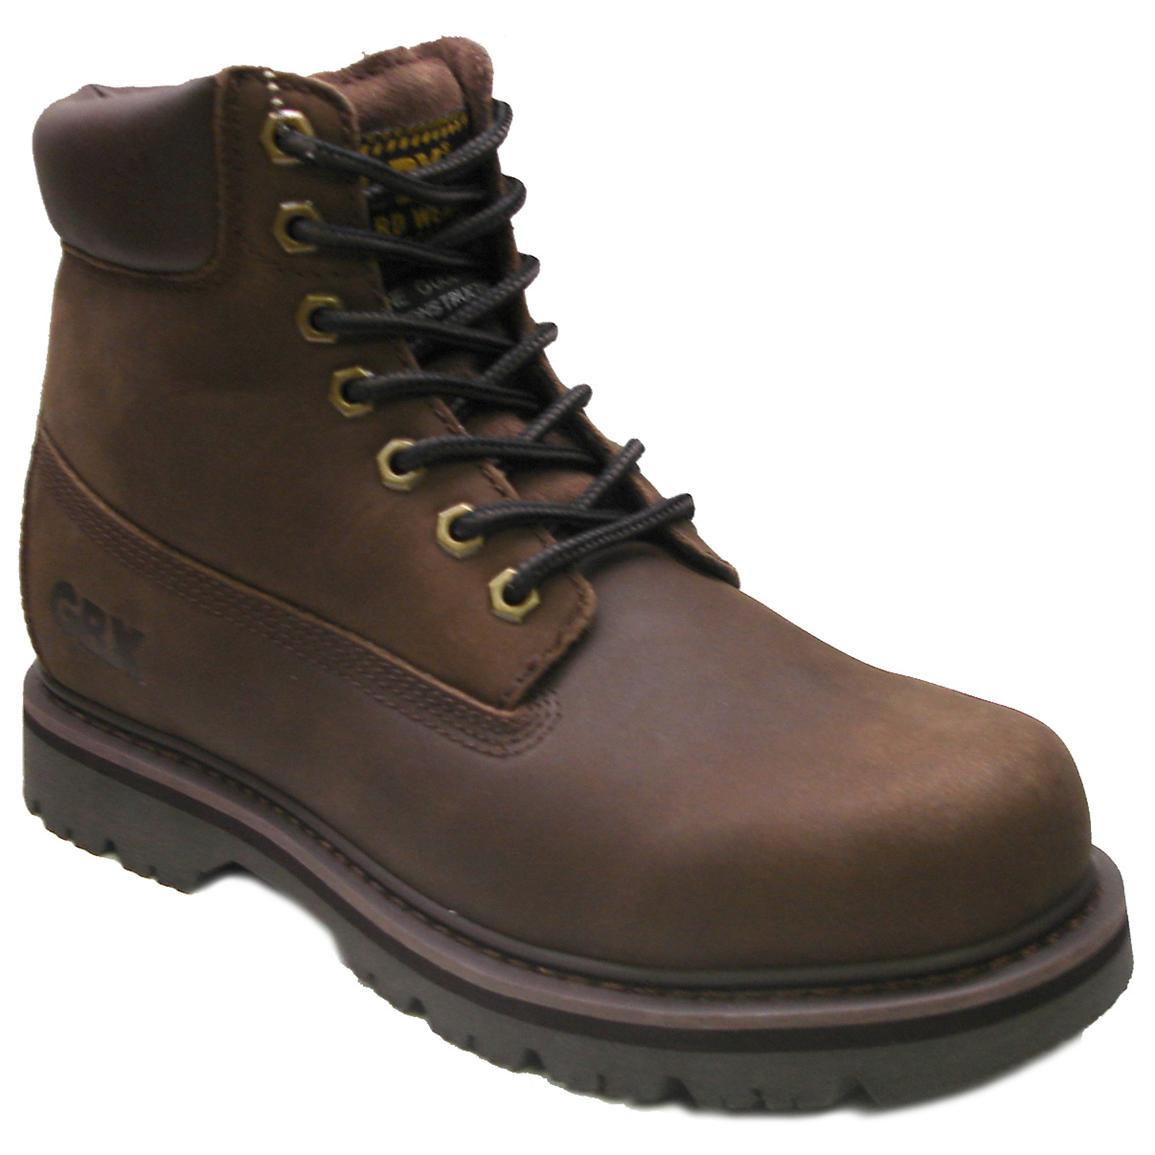 15 wide work boots